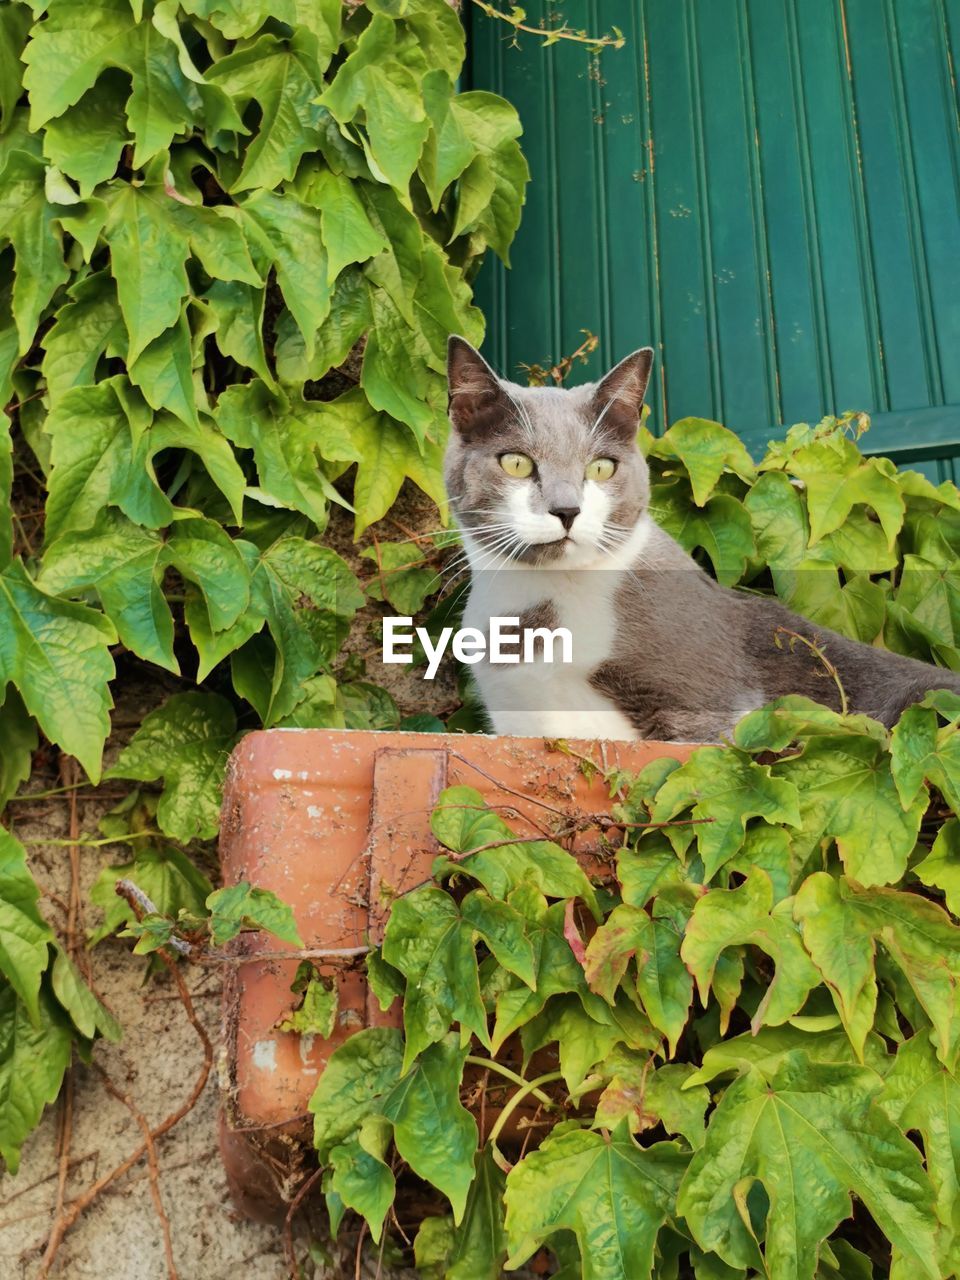 PORTRAIT OF A CAT ON PLANT